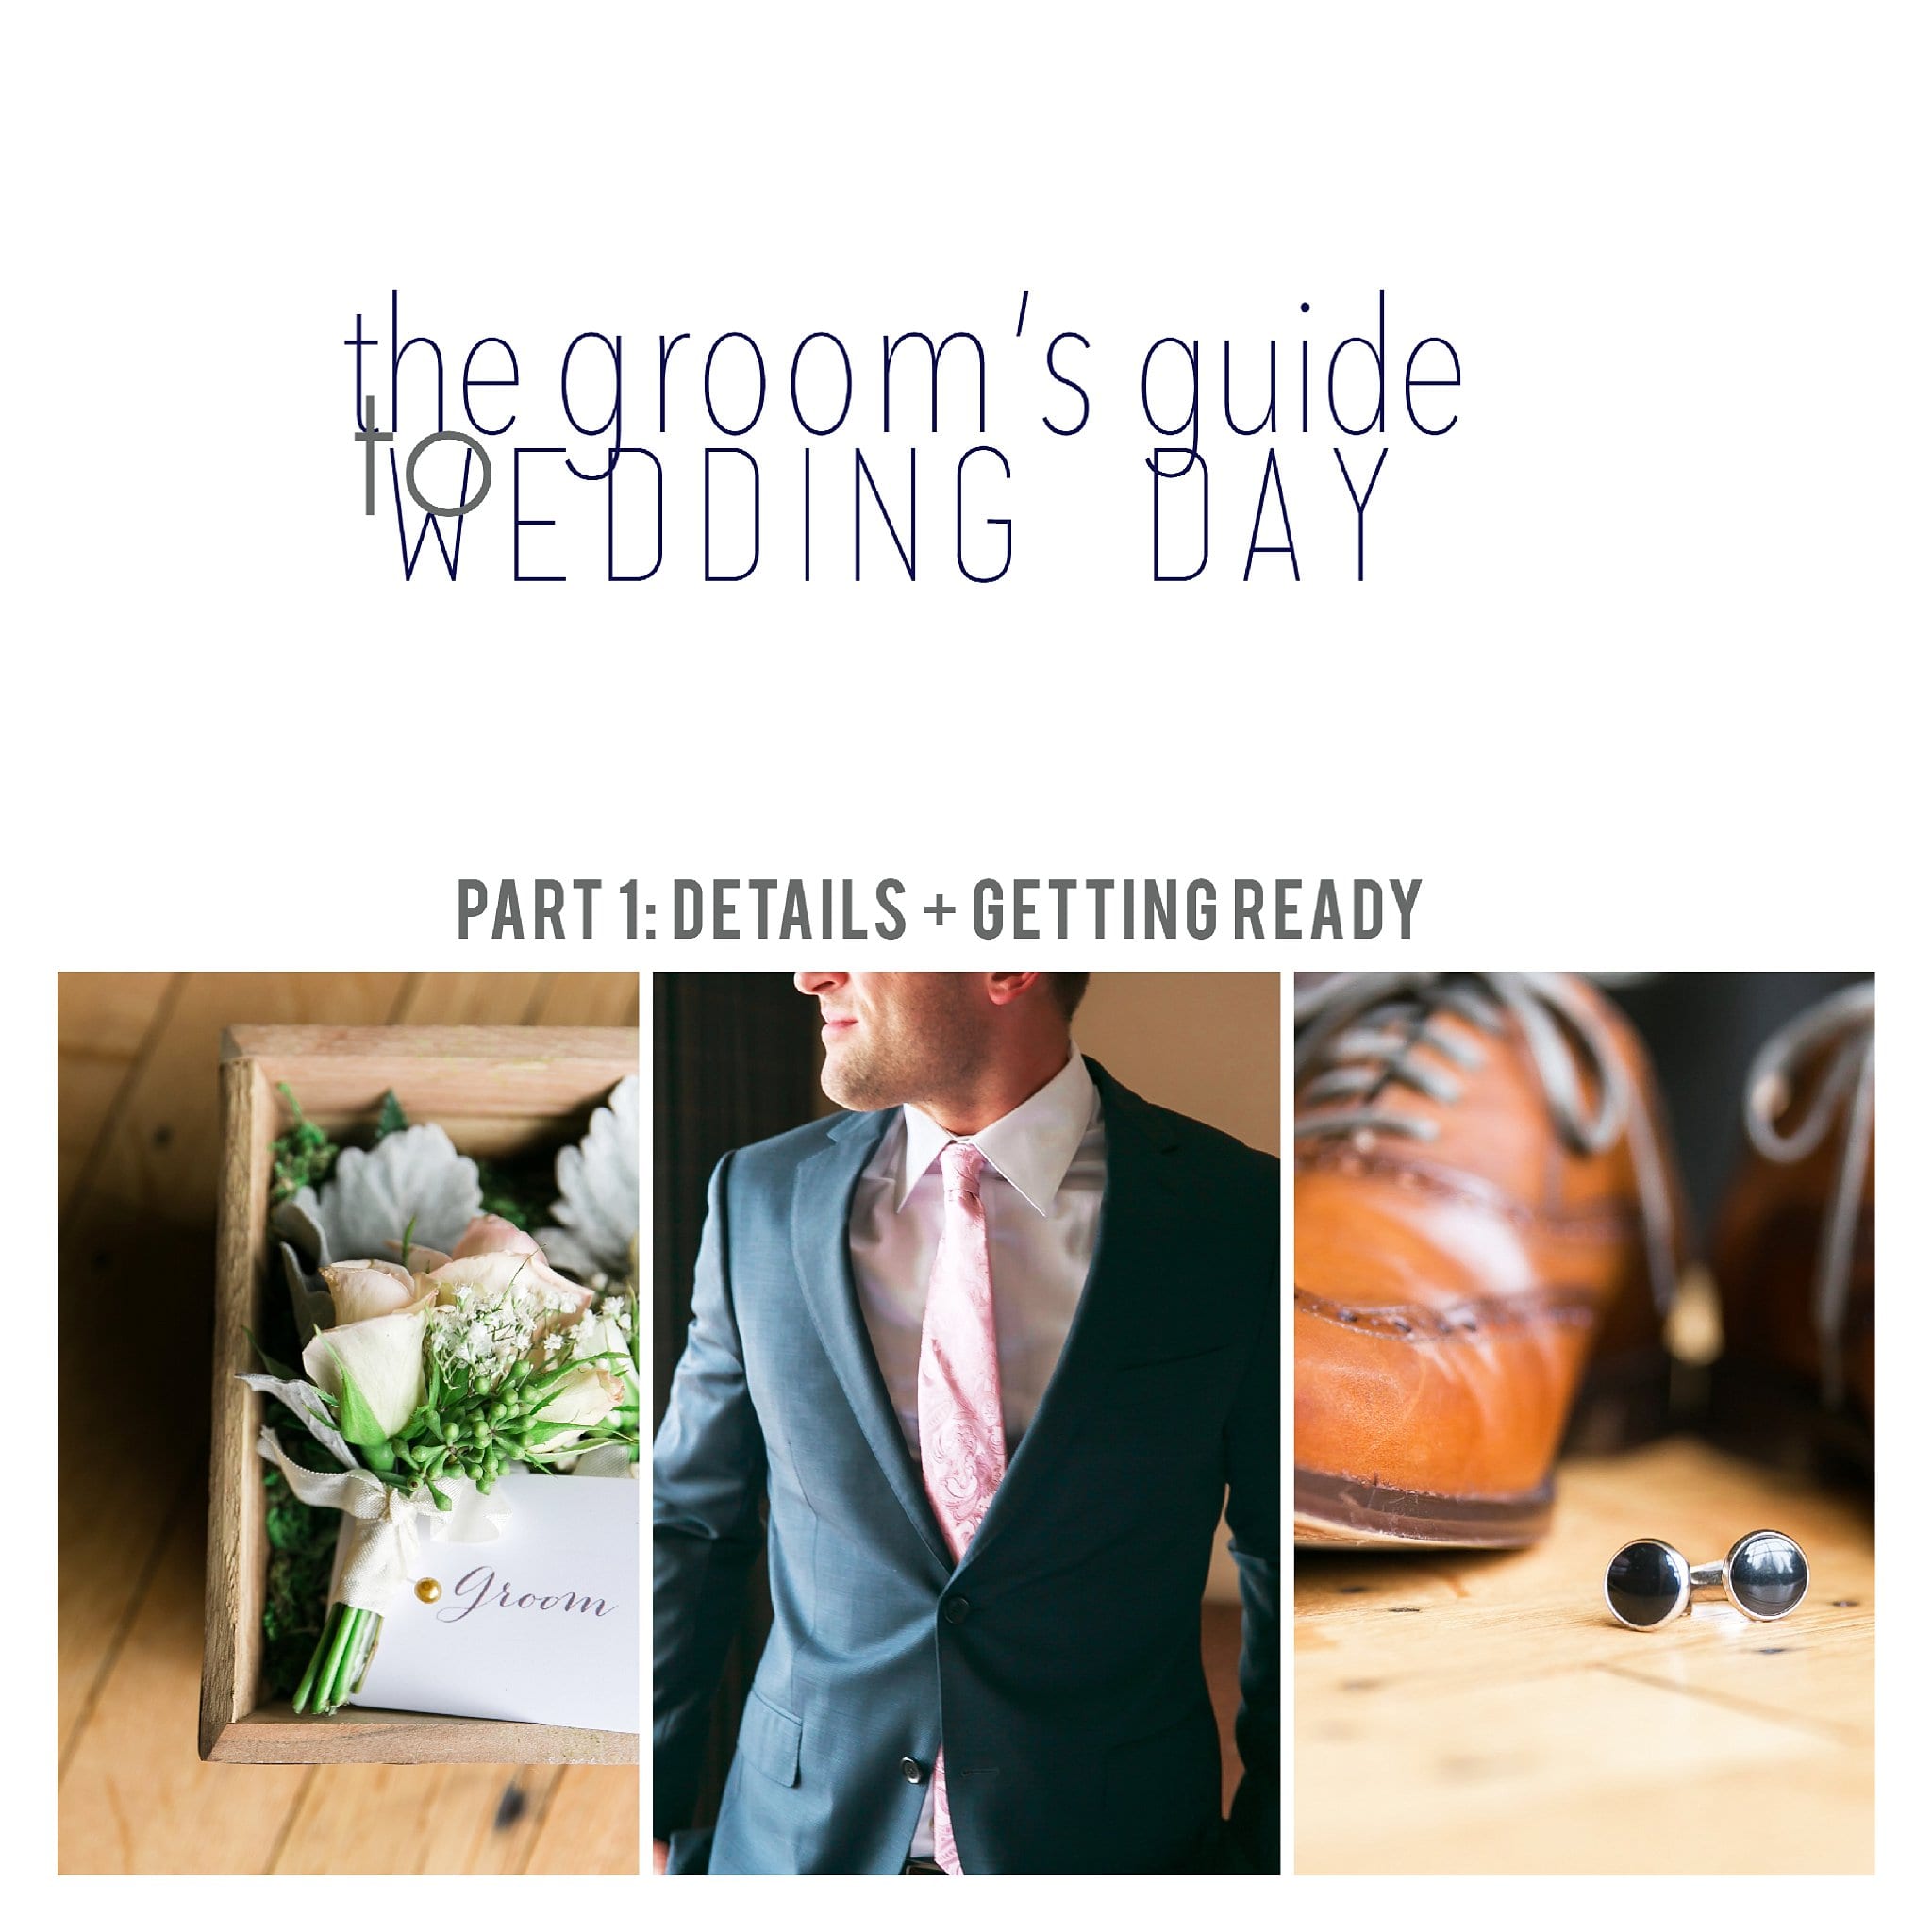 wedding day for the groom, grooms guide to wedding day, grooms details, the grooms perspective, tips for the groom